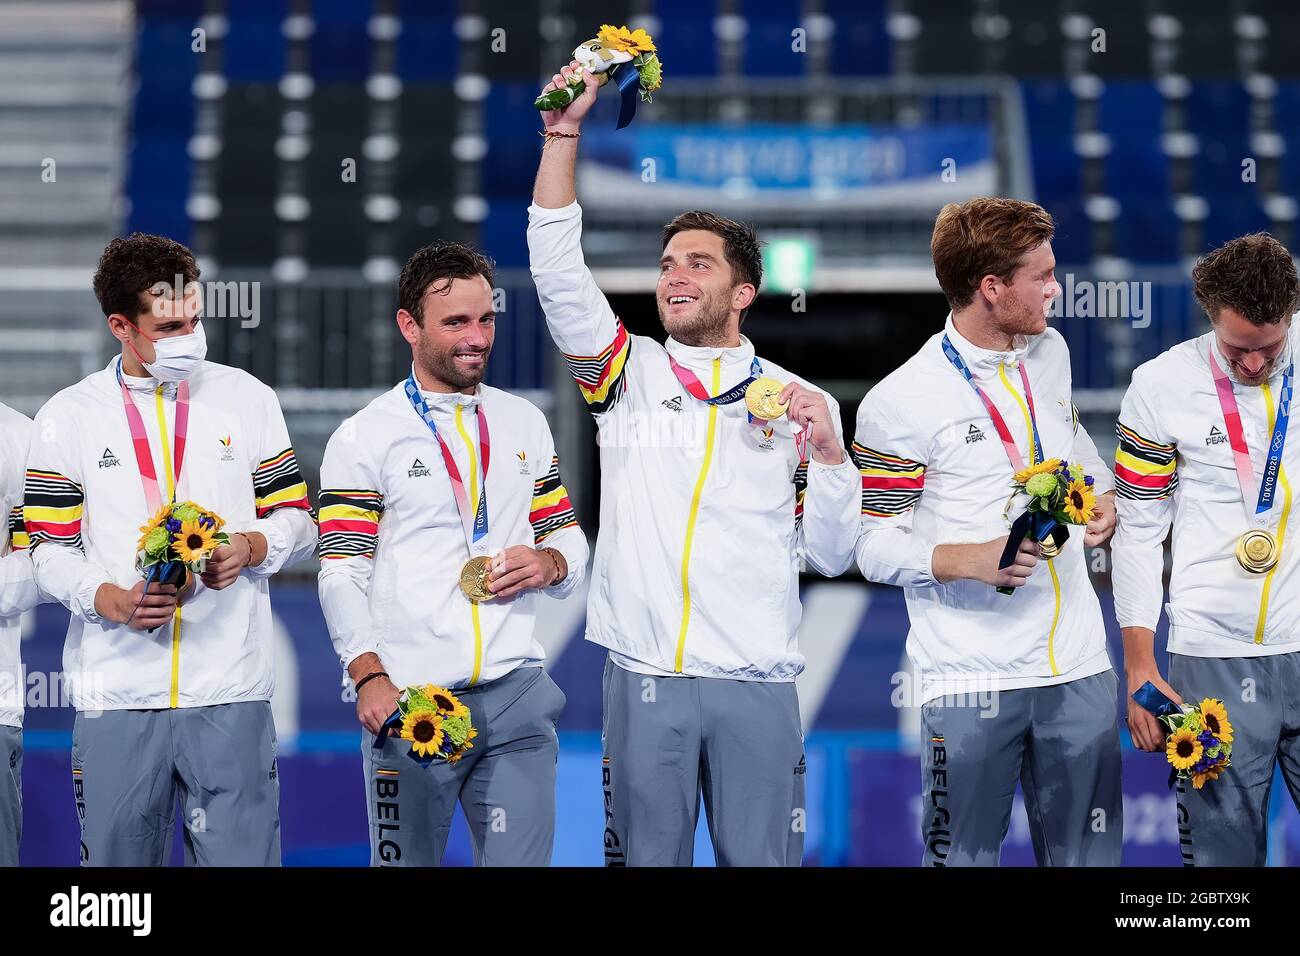 Tokyo, Japan, 5 August, 2021. Belgium players celebrate during the Men's Hockey Gold Medal match between Australia and Belgium on Day 13 of the Tokyo 2020 Olympic Games. Credit: Pete Dovgan/Speed Media/Alamy Live News Stock Photo